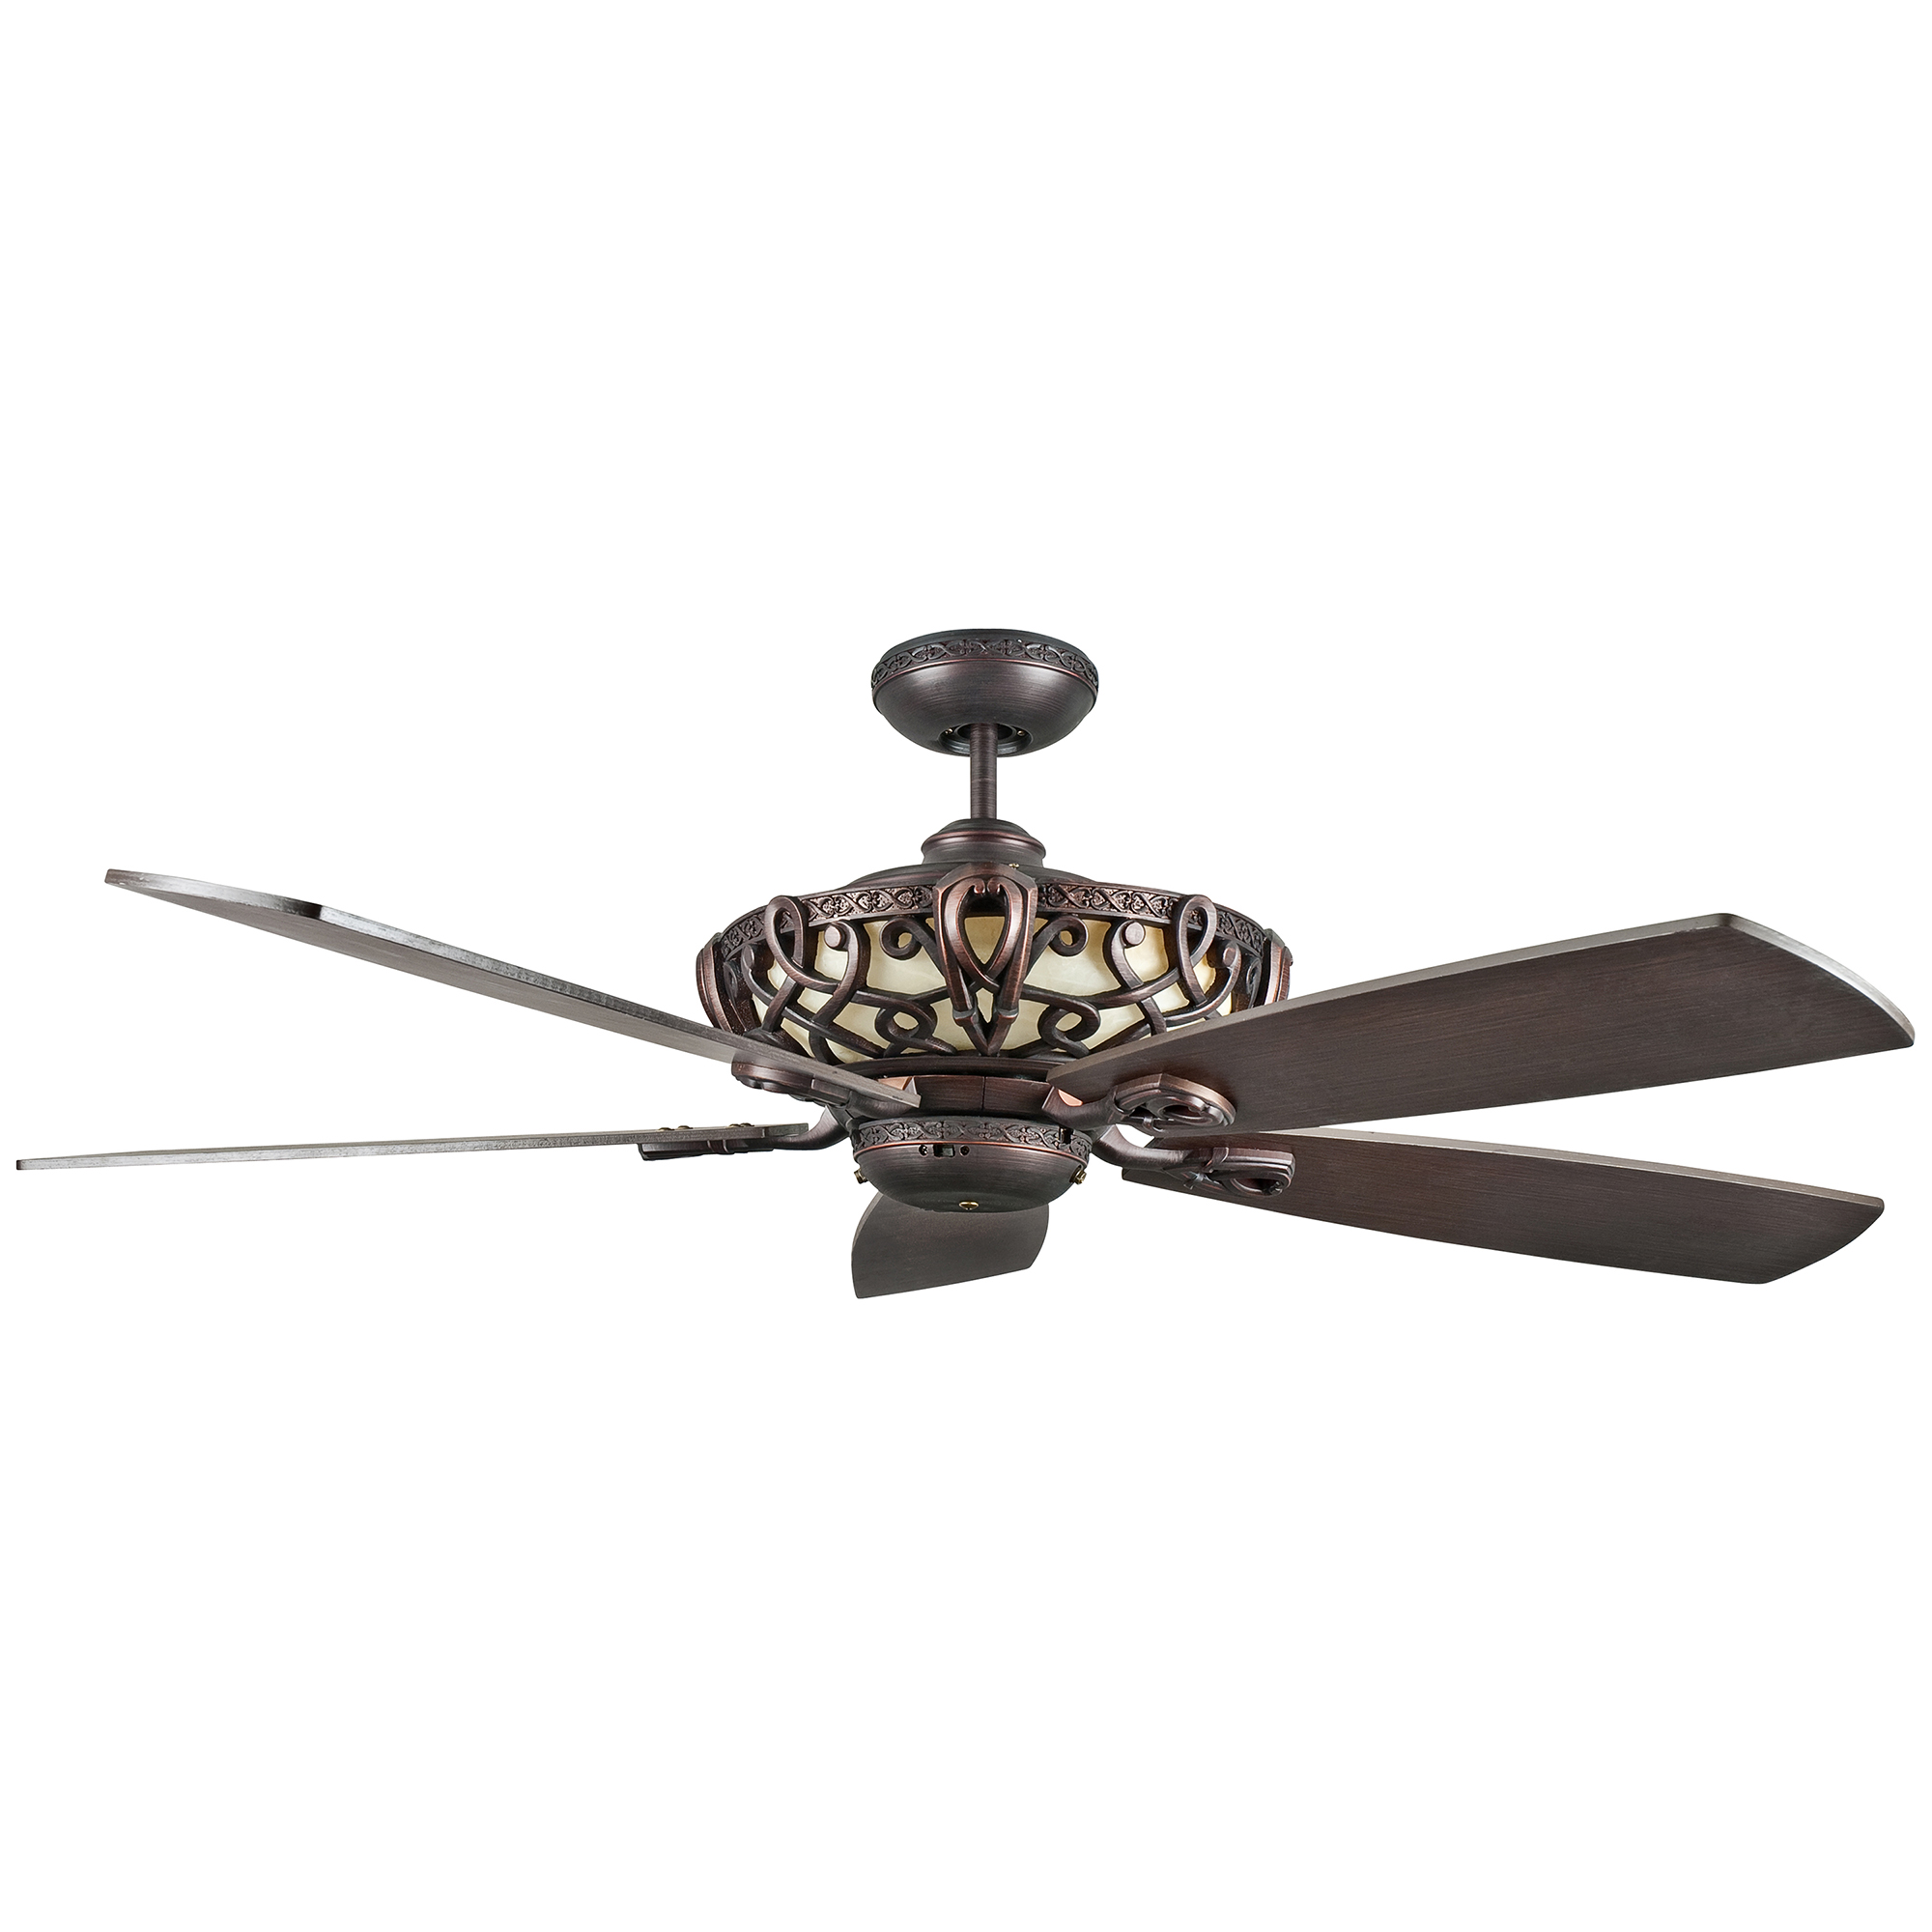 Concord Fans 52 Inches Aracruz Ceiling Fan Orb - with Oil Rubbed Bronze Finish